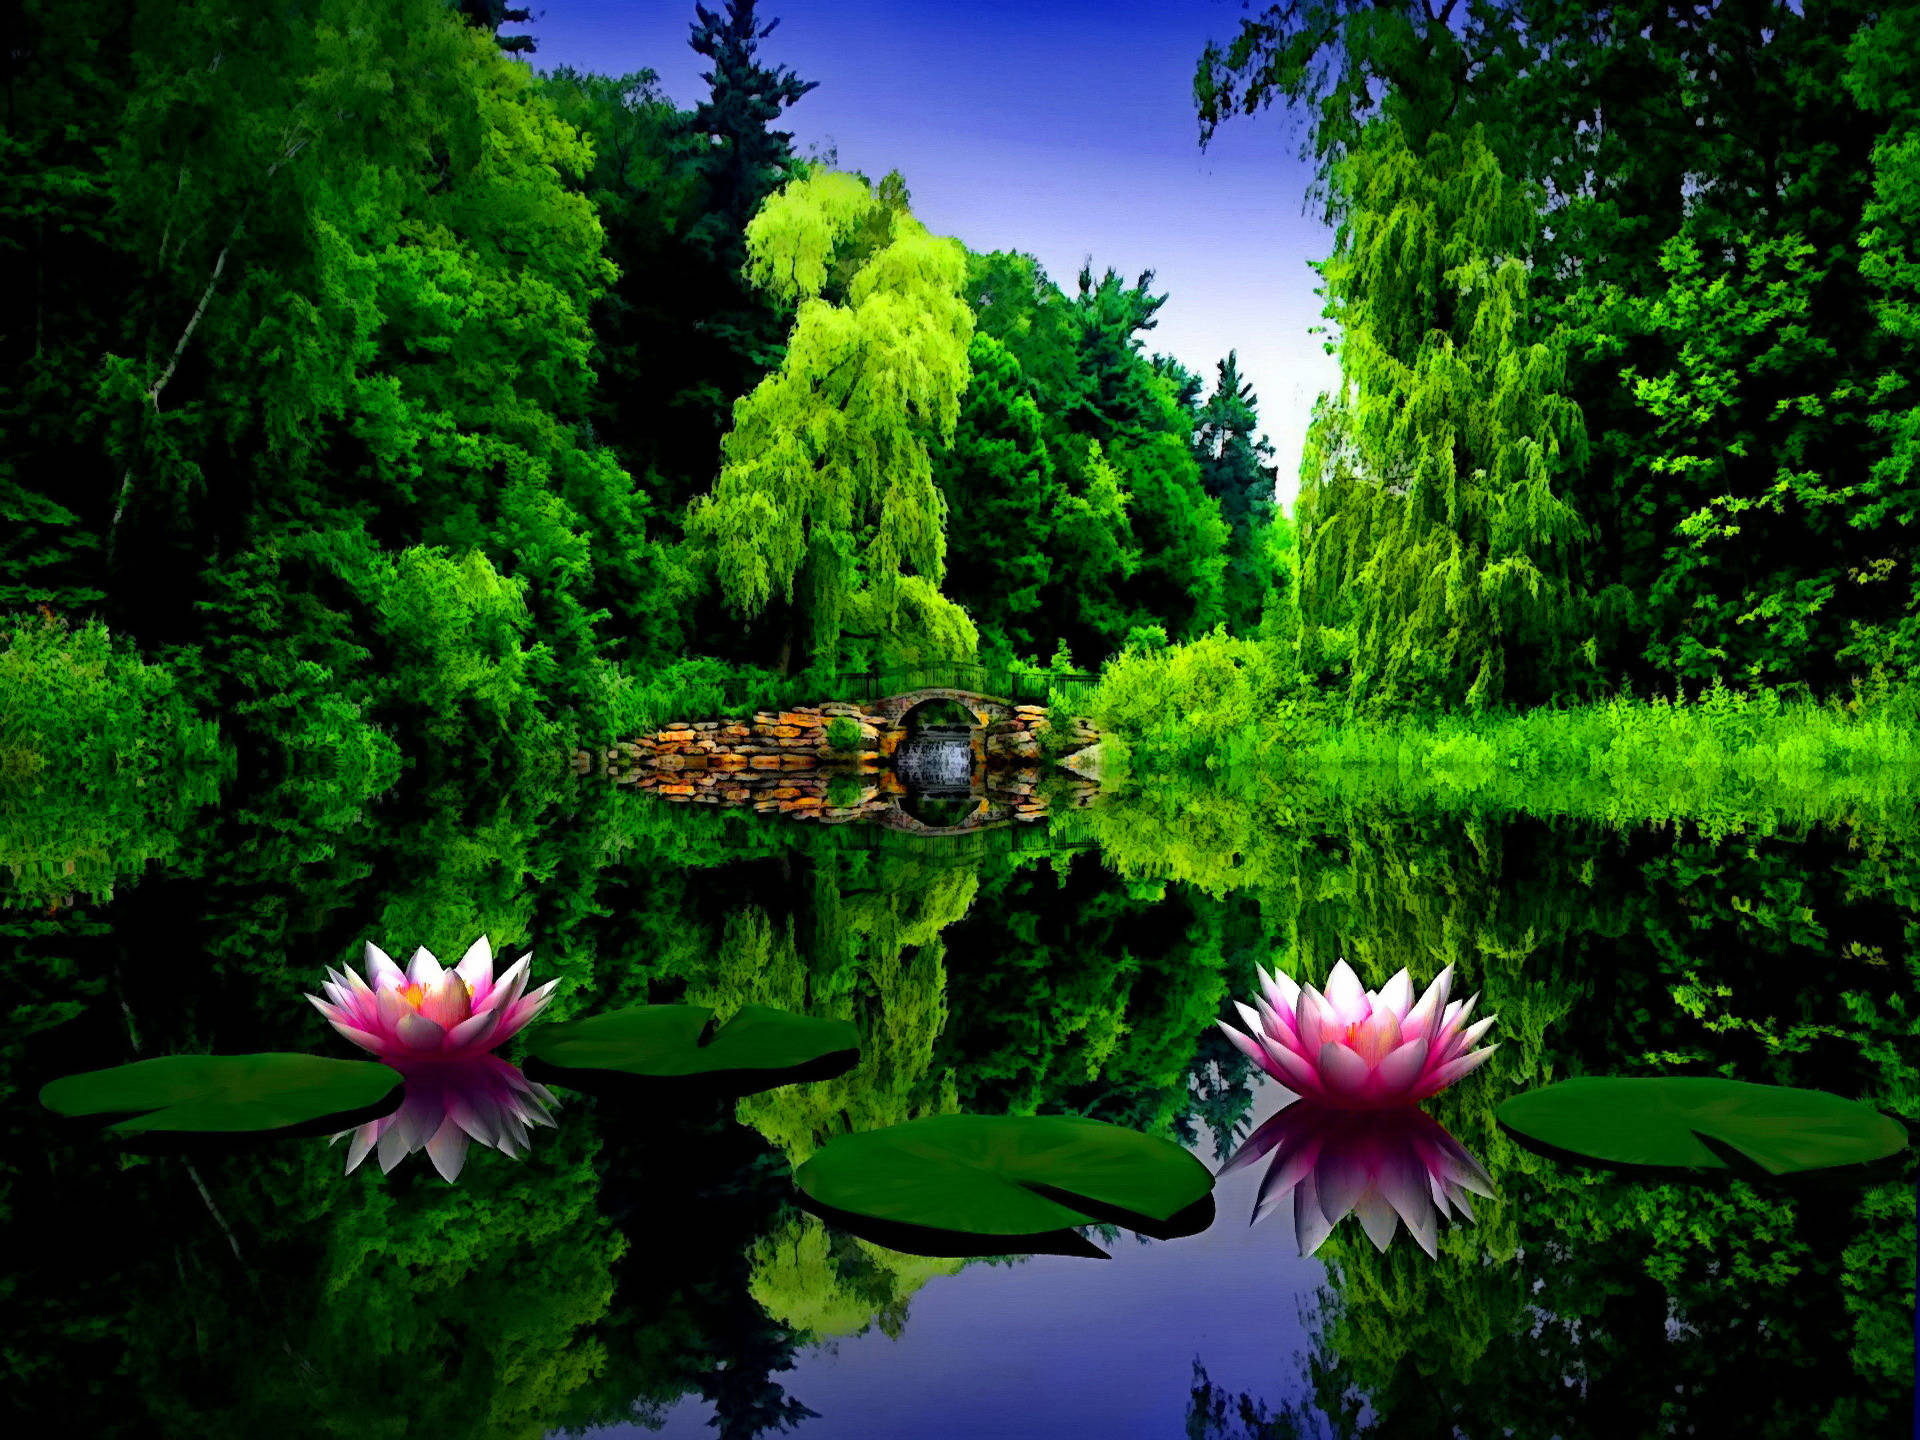 Park Lotus And Lily Pads